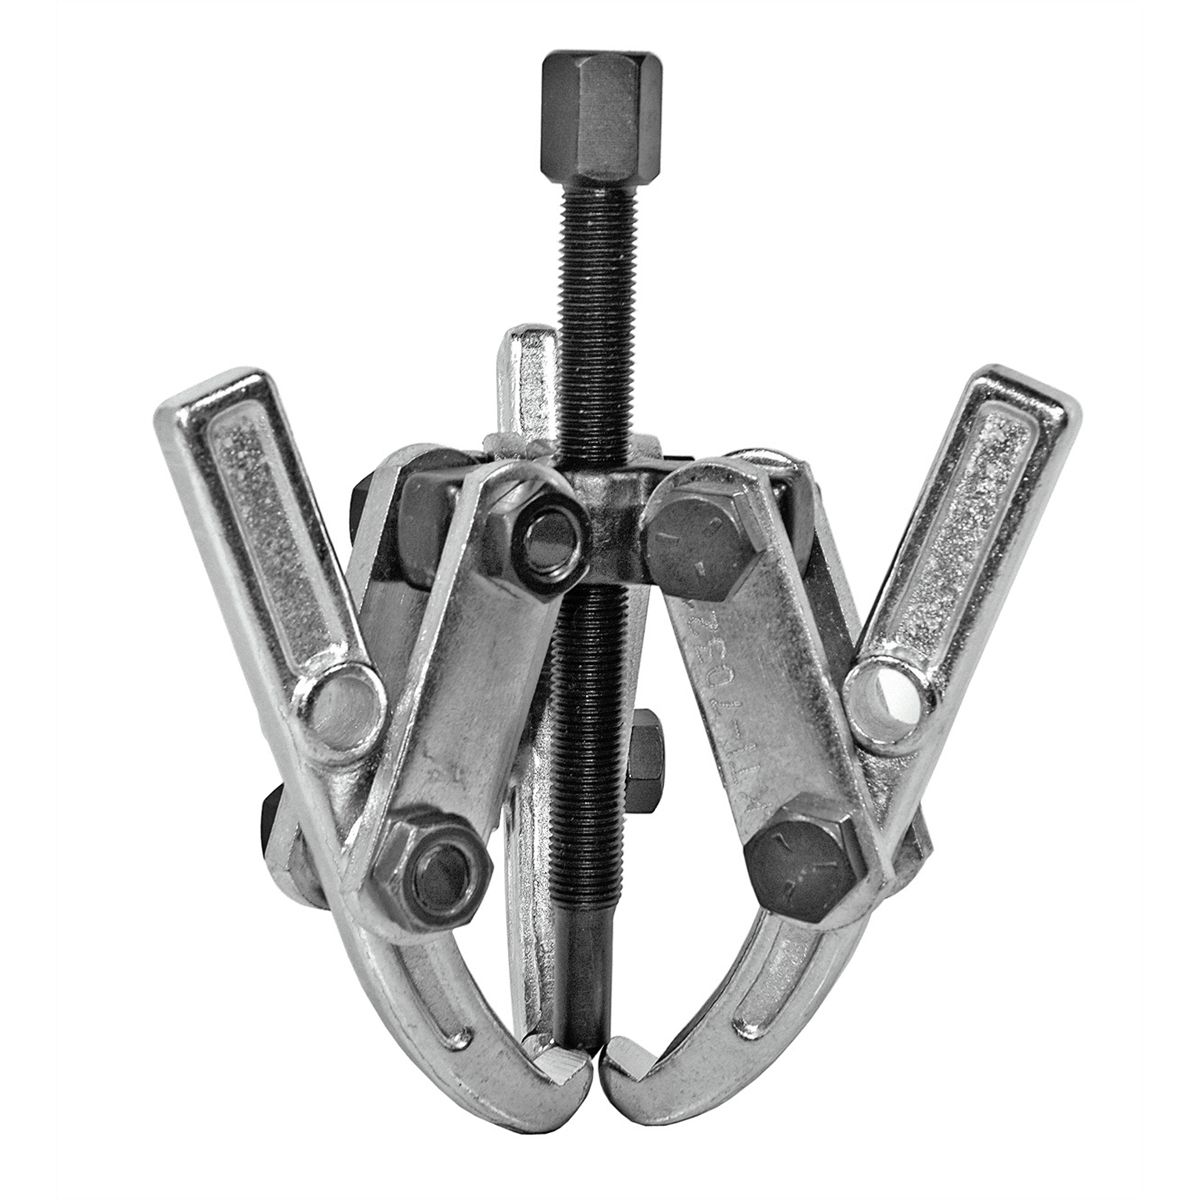 Three Jaw Adjustable Puller - 4 In - 5 Ton